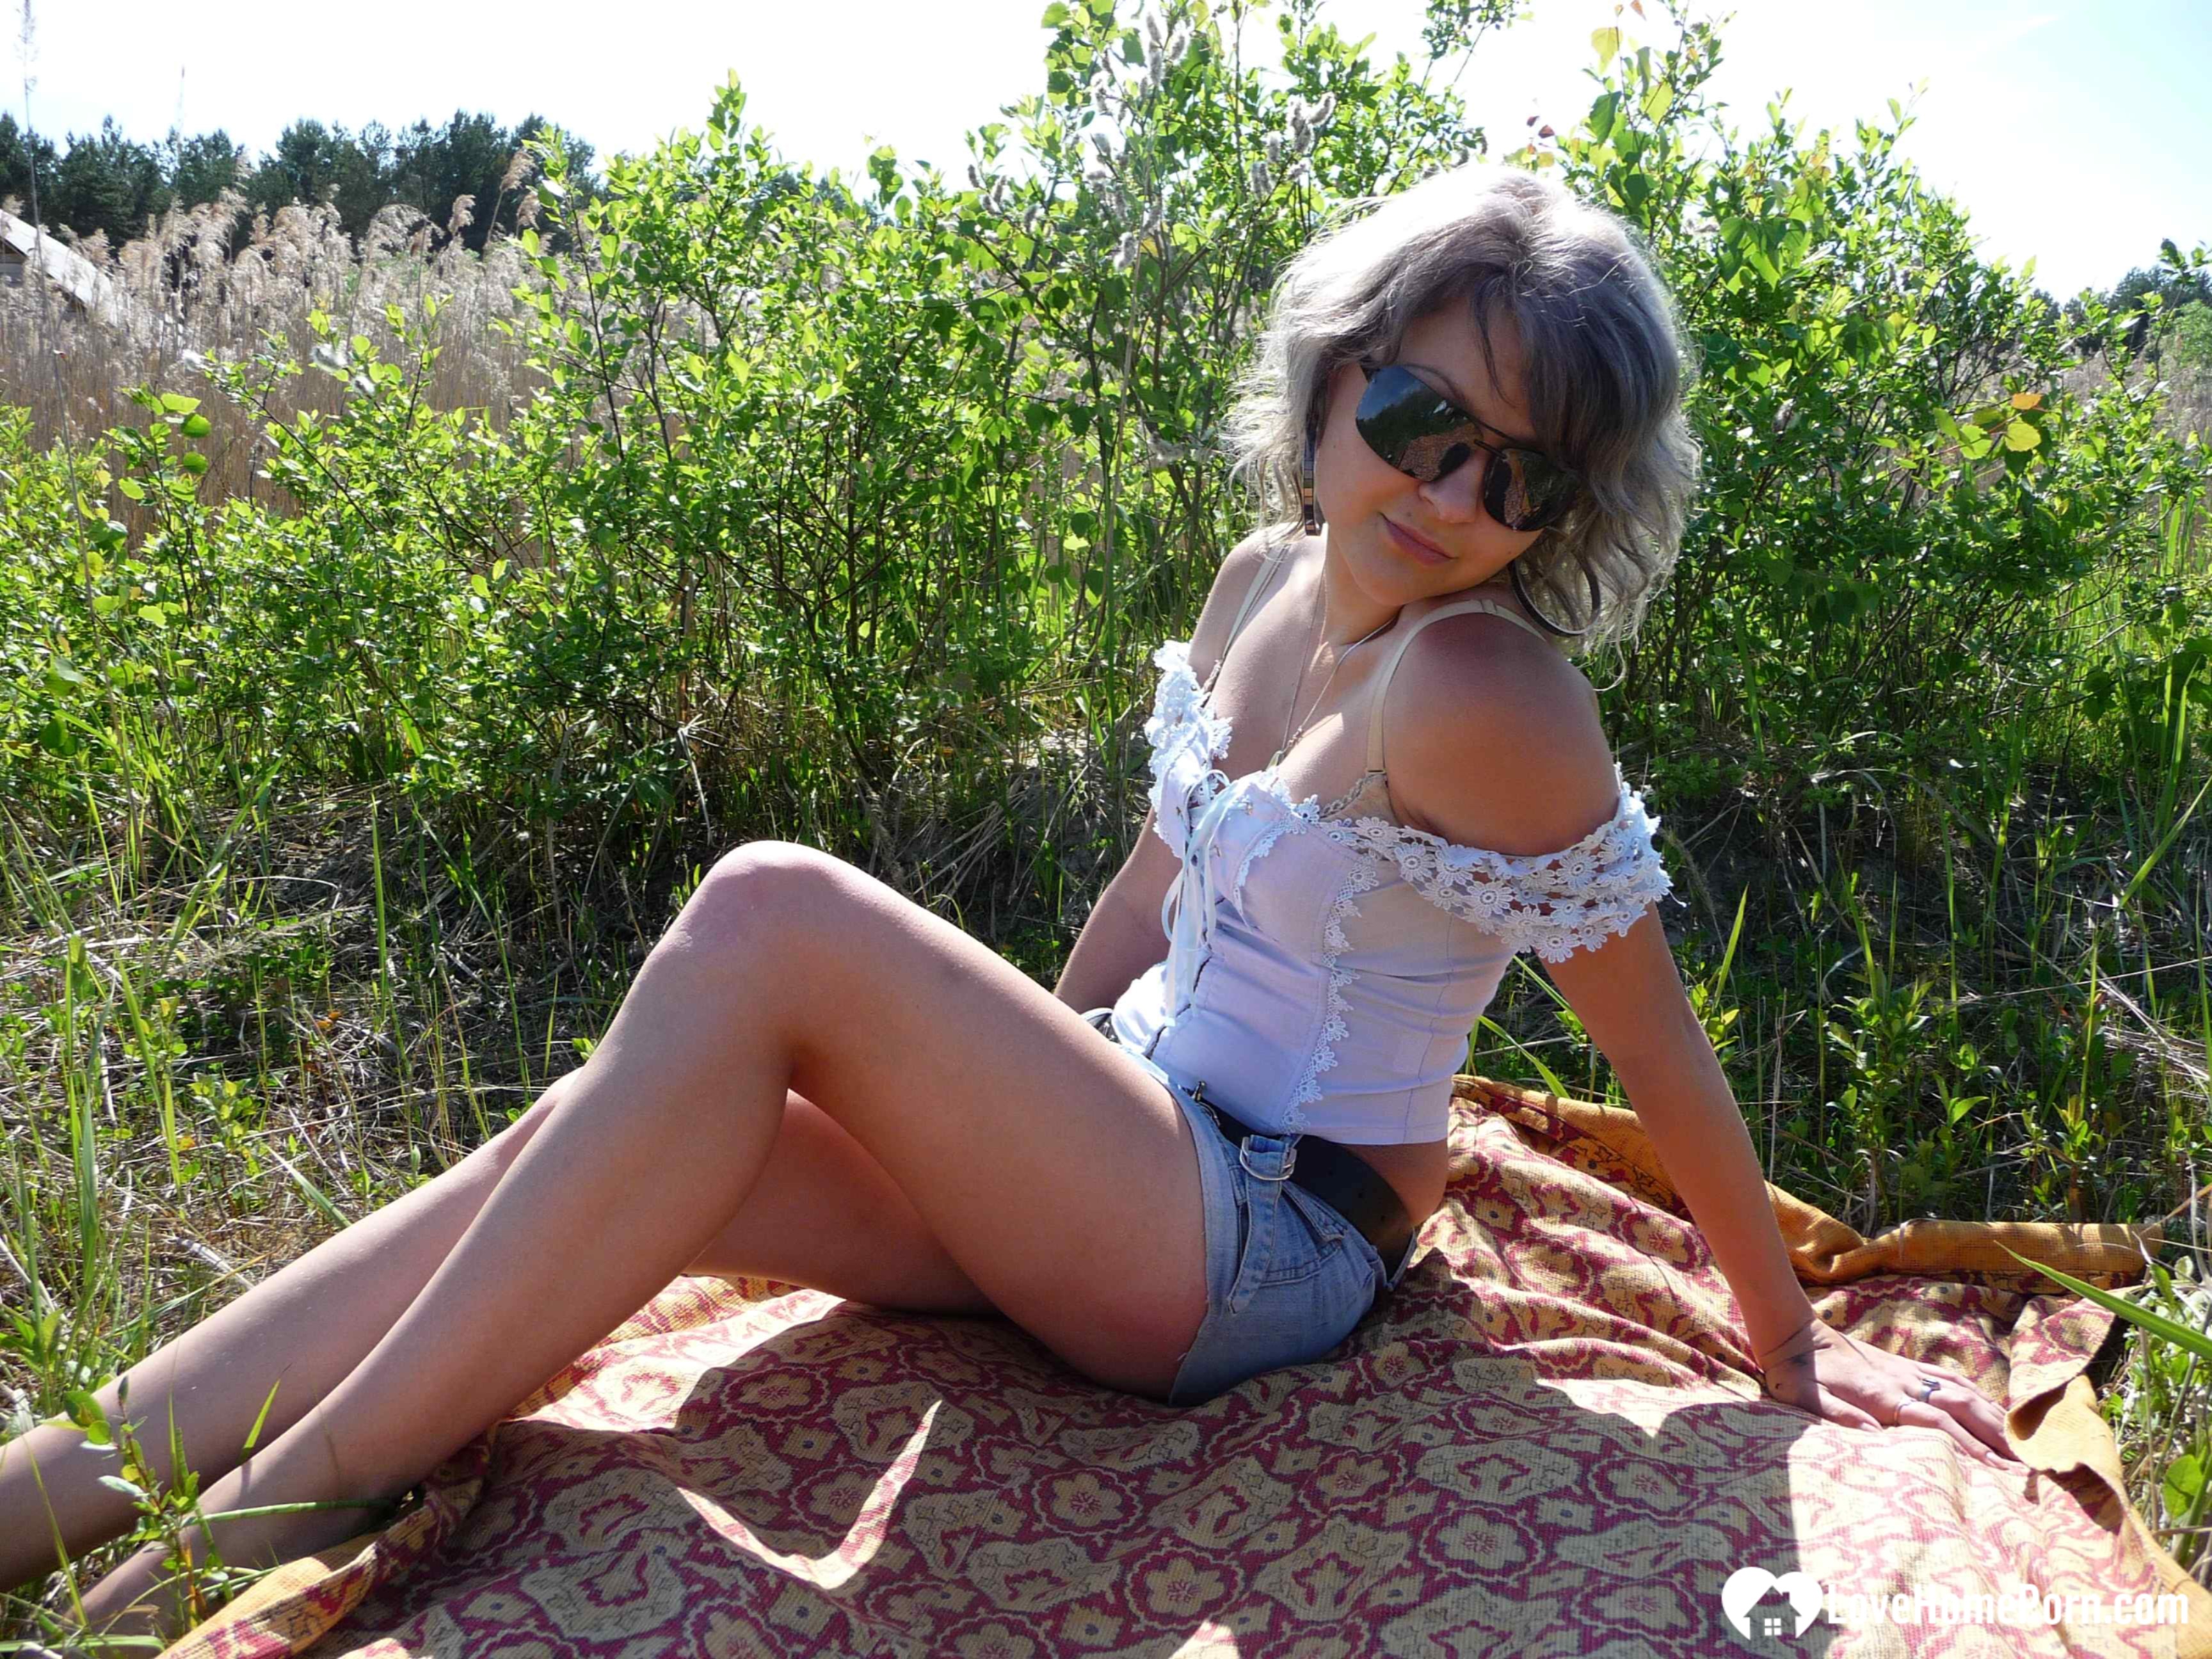 Gray-haired beauty posing naked outdoors on a blanket